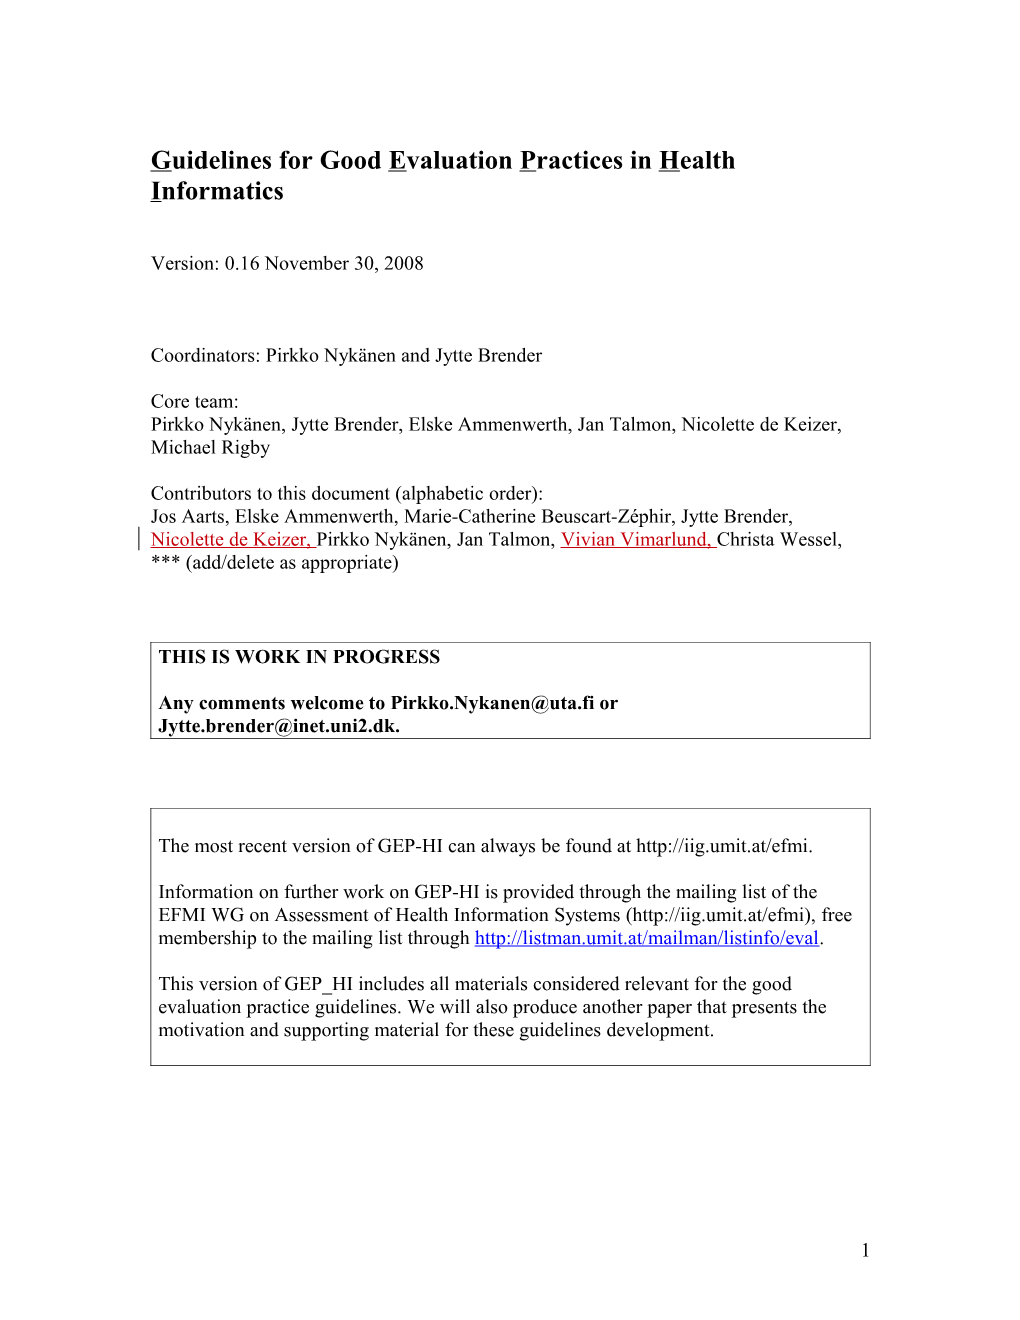 GEP HI: Guidelines for Good Evaluation Practices in Health Informatics